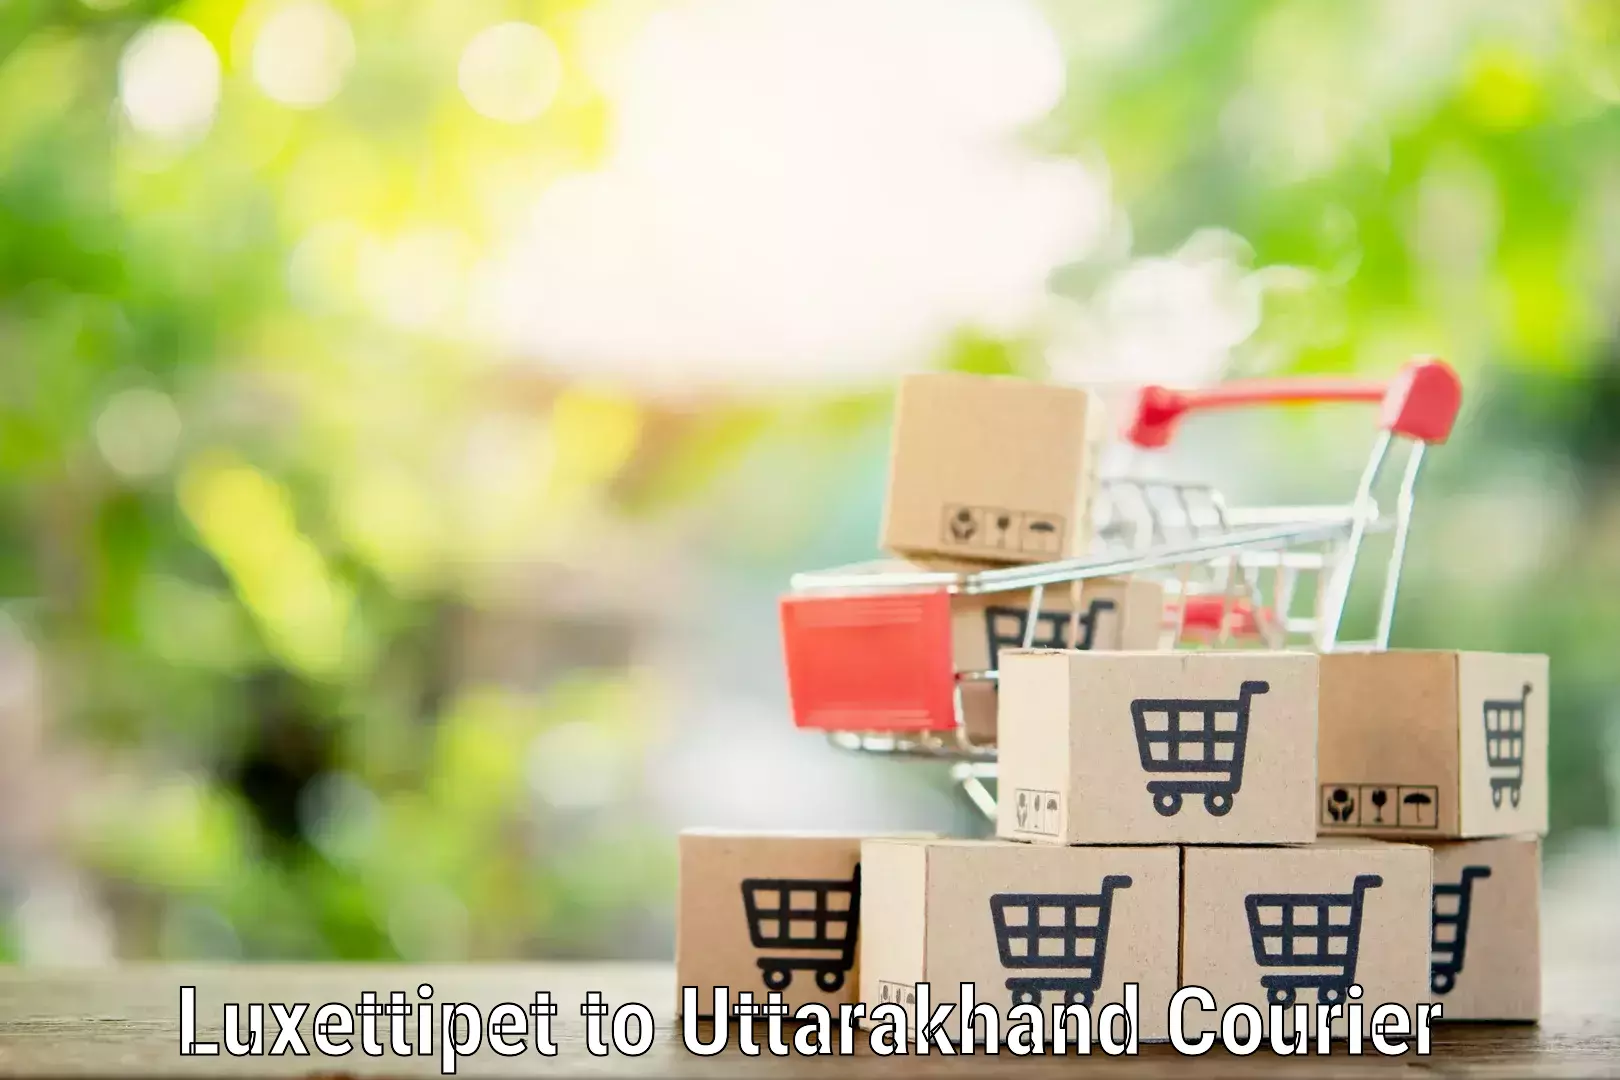 Furniture transport specialists Luxettipet to Uttarakhand